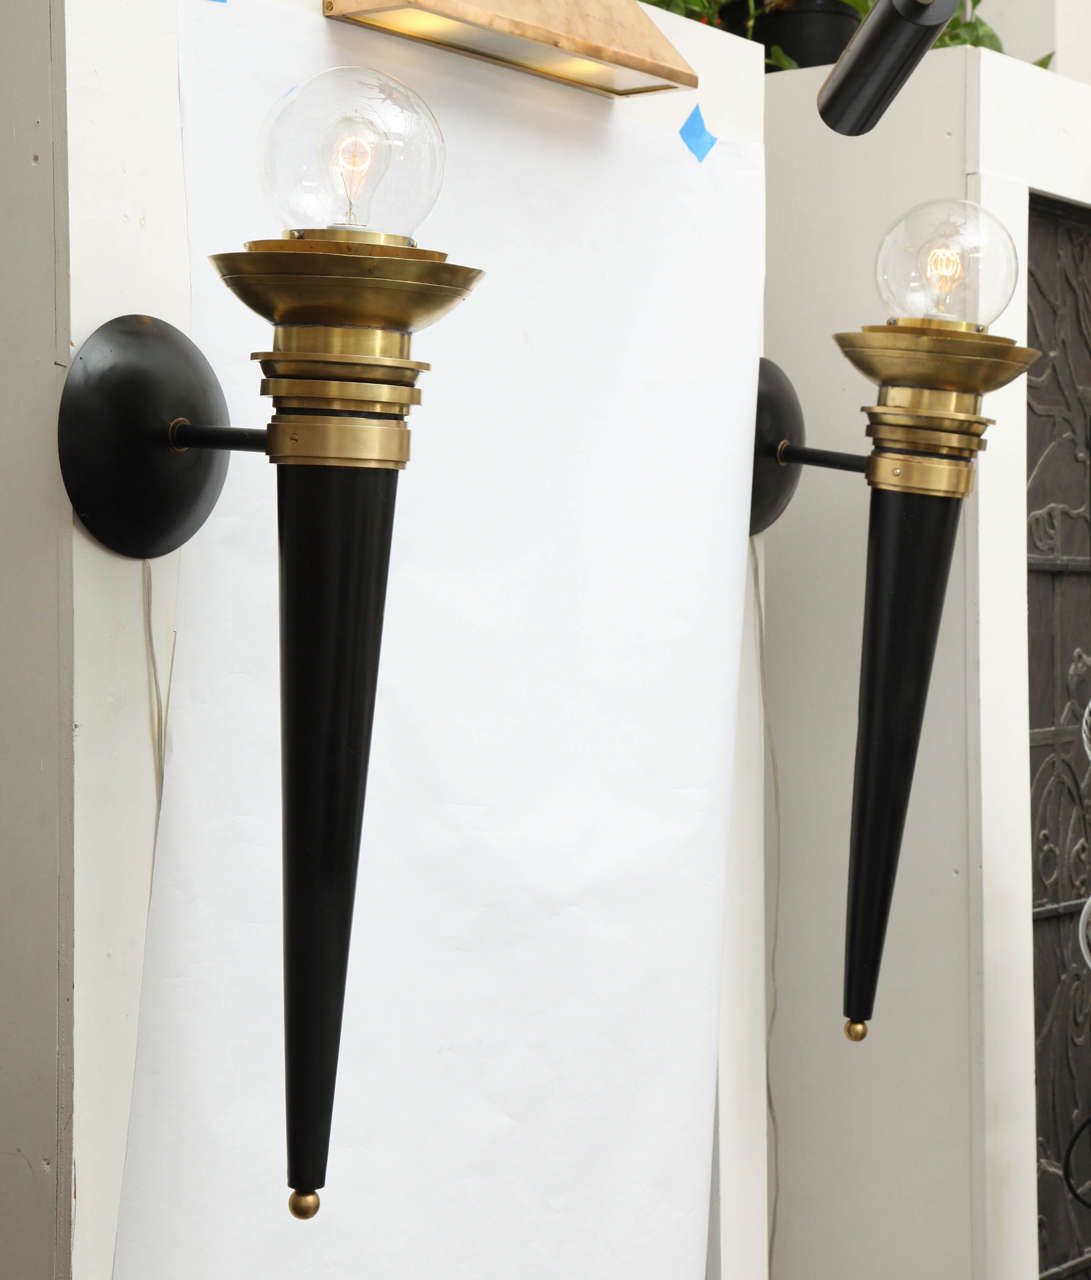 A pair of 1940s Art Moderne sconces, crafted of polished brass, painted metal and glass.

10491